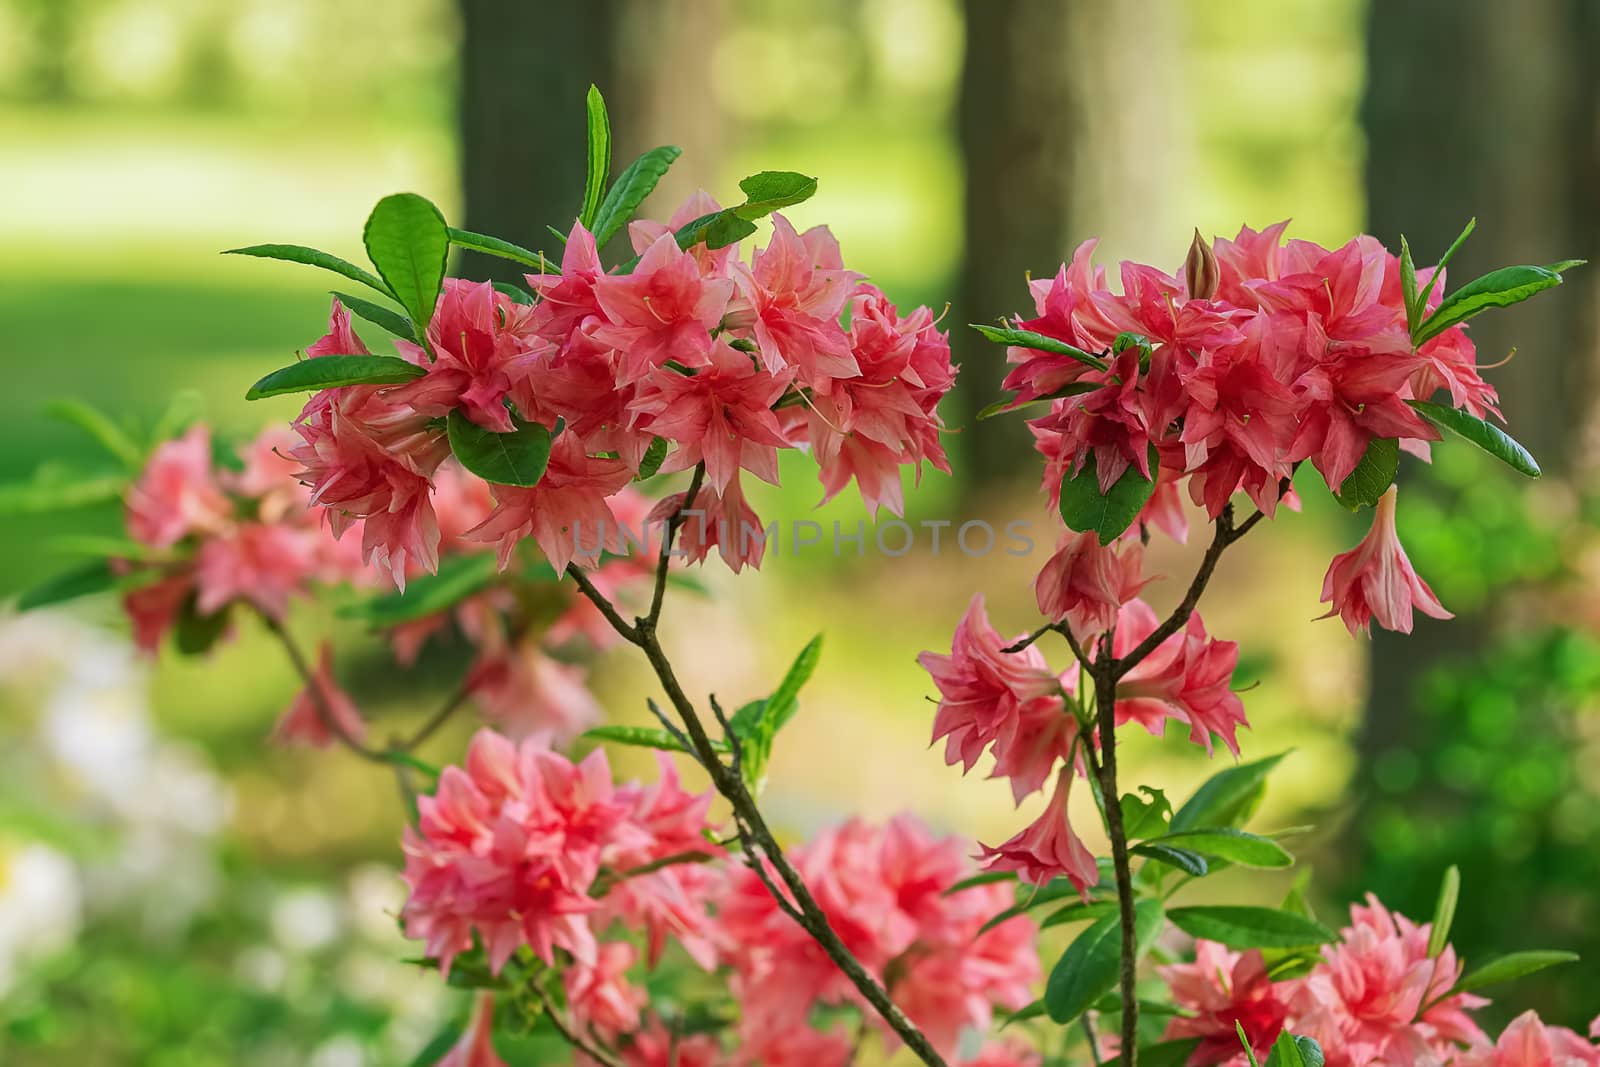 Rhododendron flowers in the forest by SNR